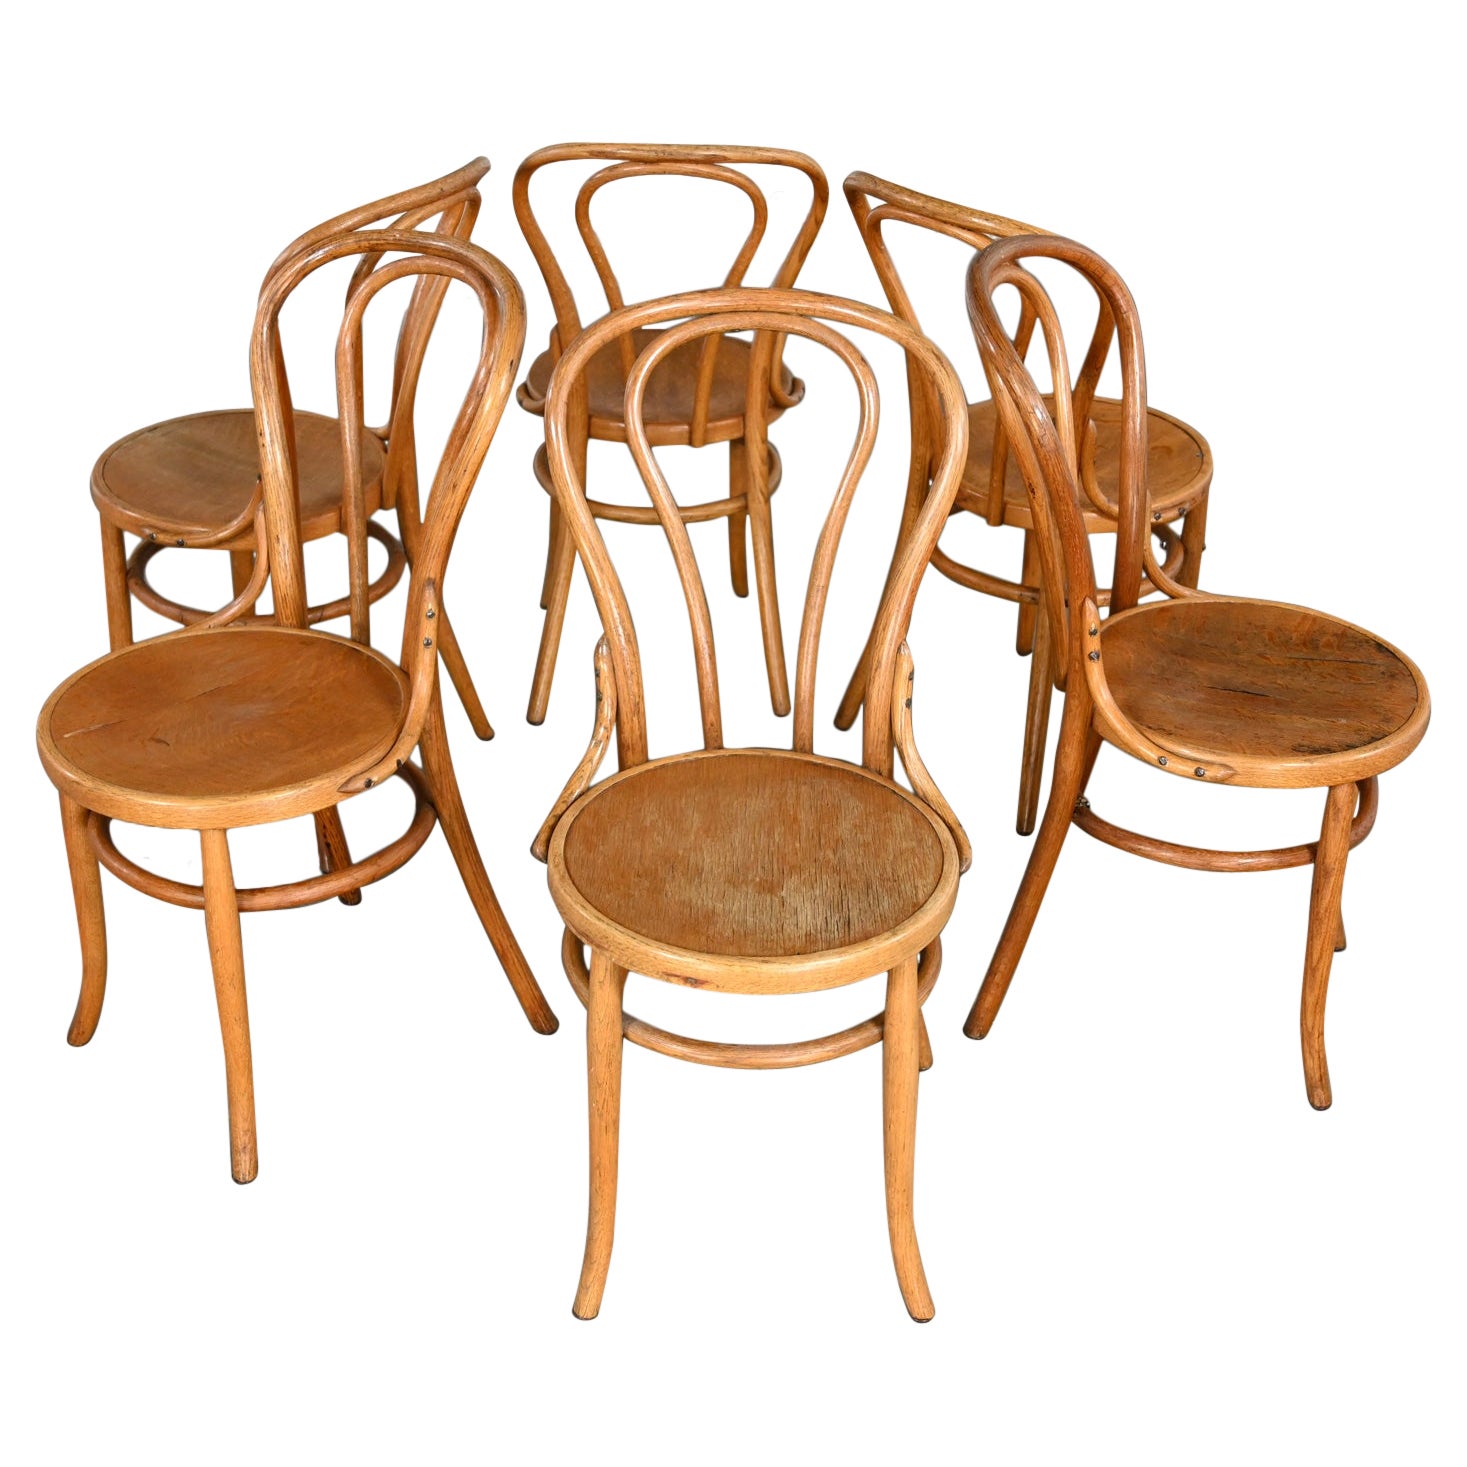 Bauhaus Oak Bentwood Chairs Attributed to Thonet #18 Café Chair Set of 6 For Sale